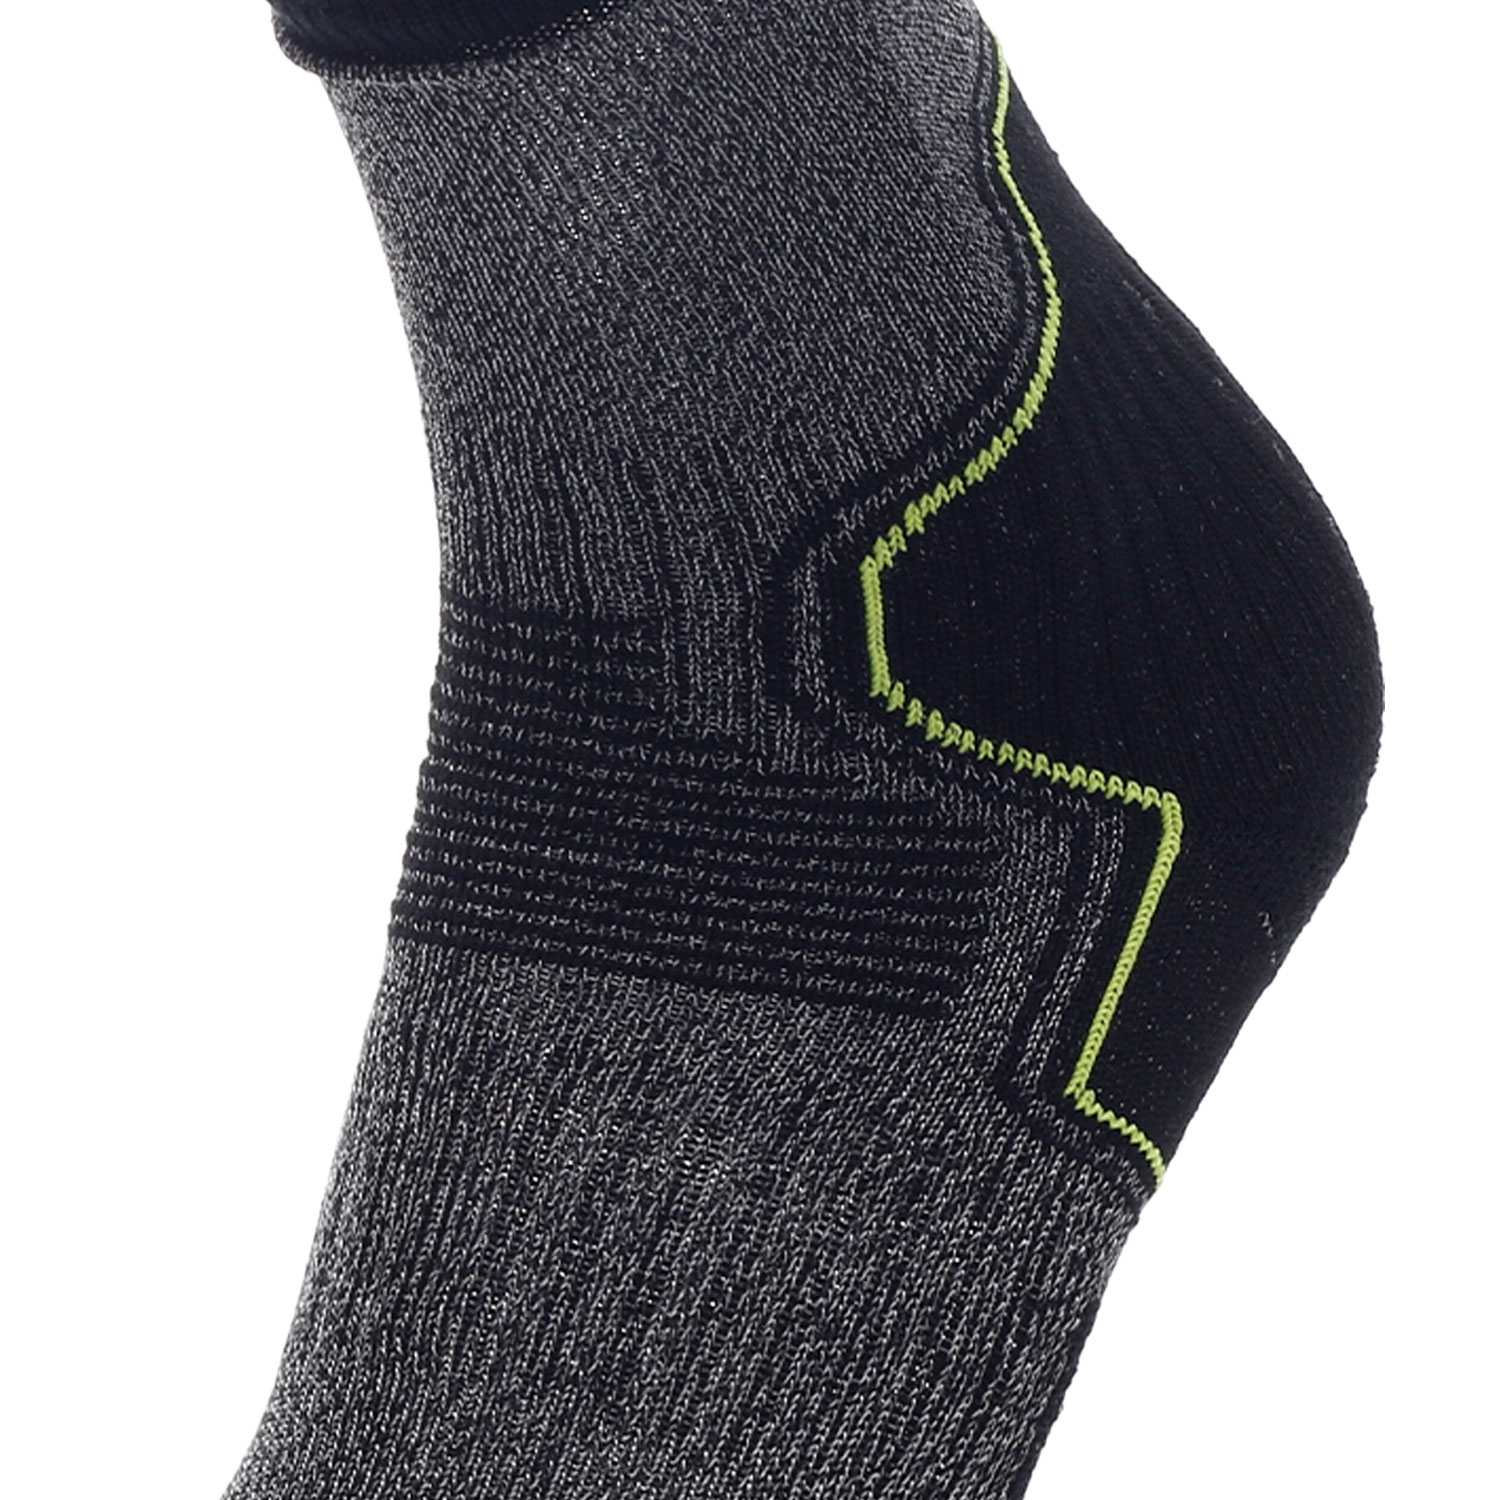 Mico Ever Dry Protech Light Weight Socks - Nero/Giallo Fluo